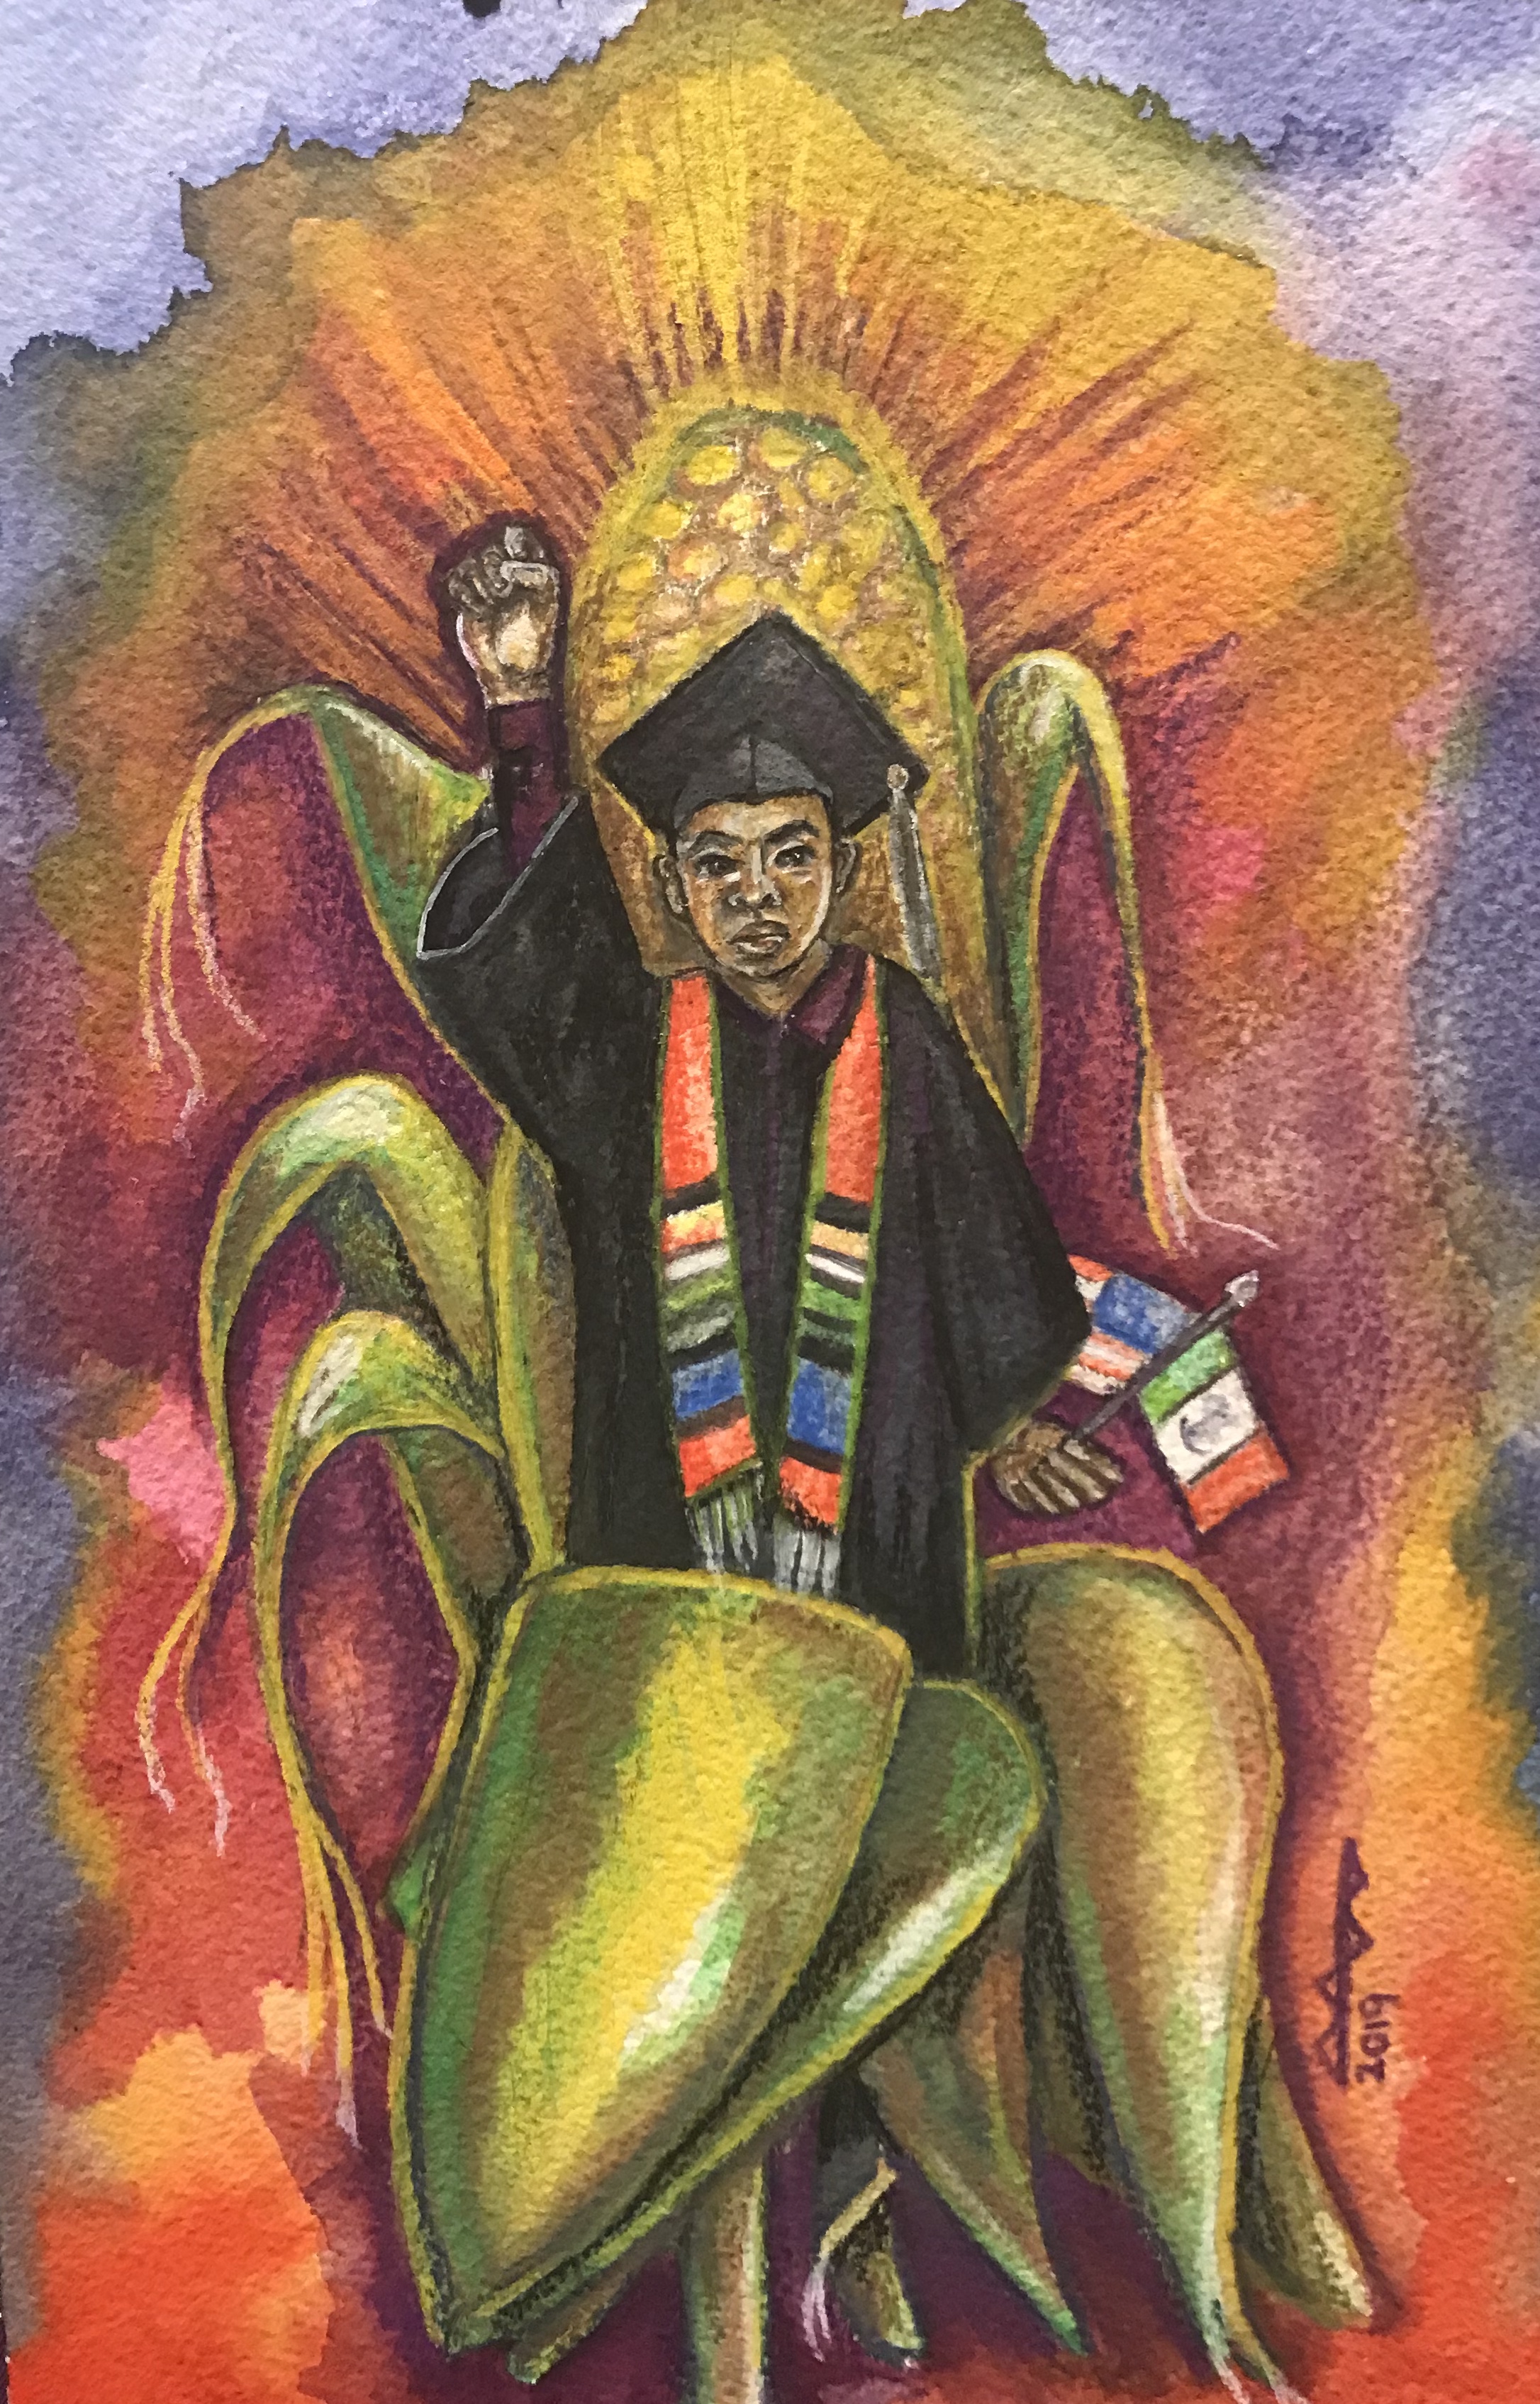 "Dreamers Grow like Maiz," by Berenice Badillo, another piece that is part of the "Latinx: Art Beyond the Border" exhibit at San Joaquin Delta College's L.H. Horton Gallery.